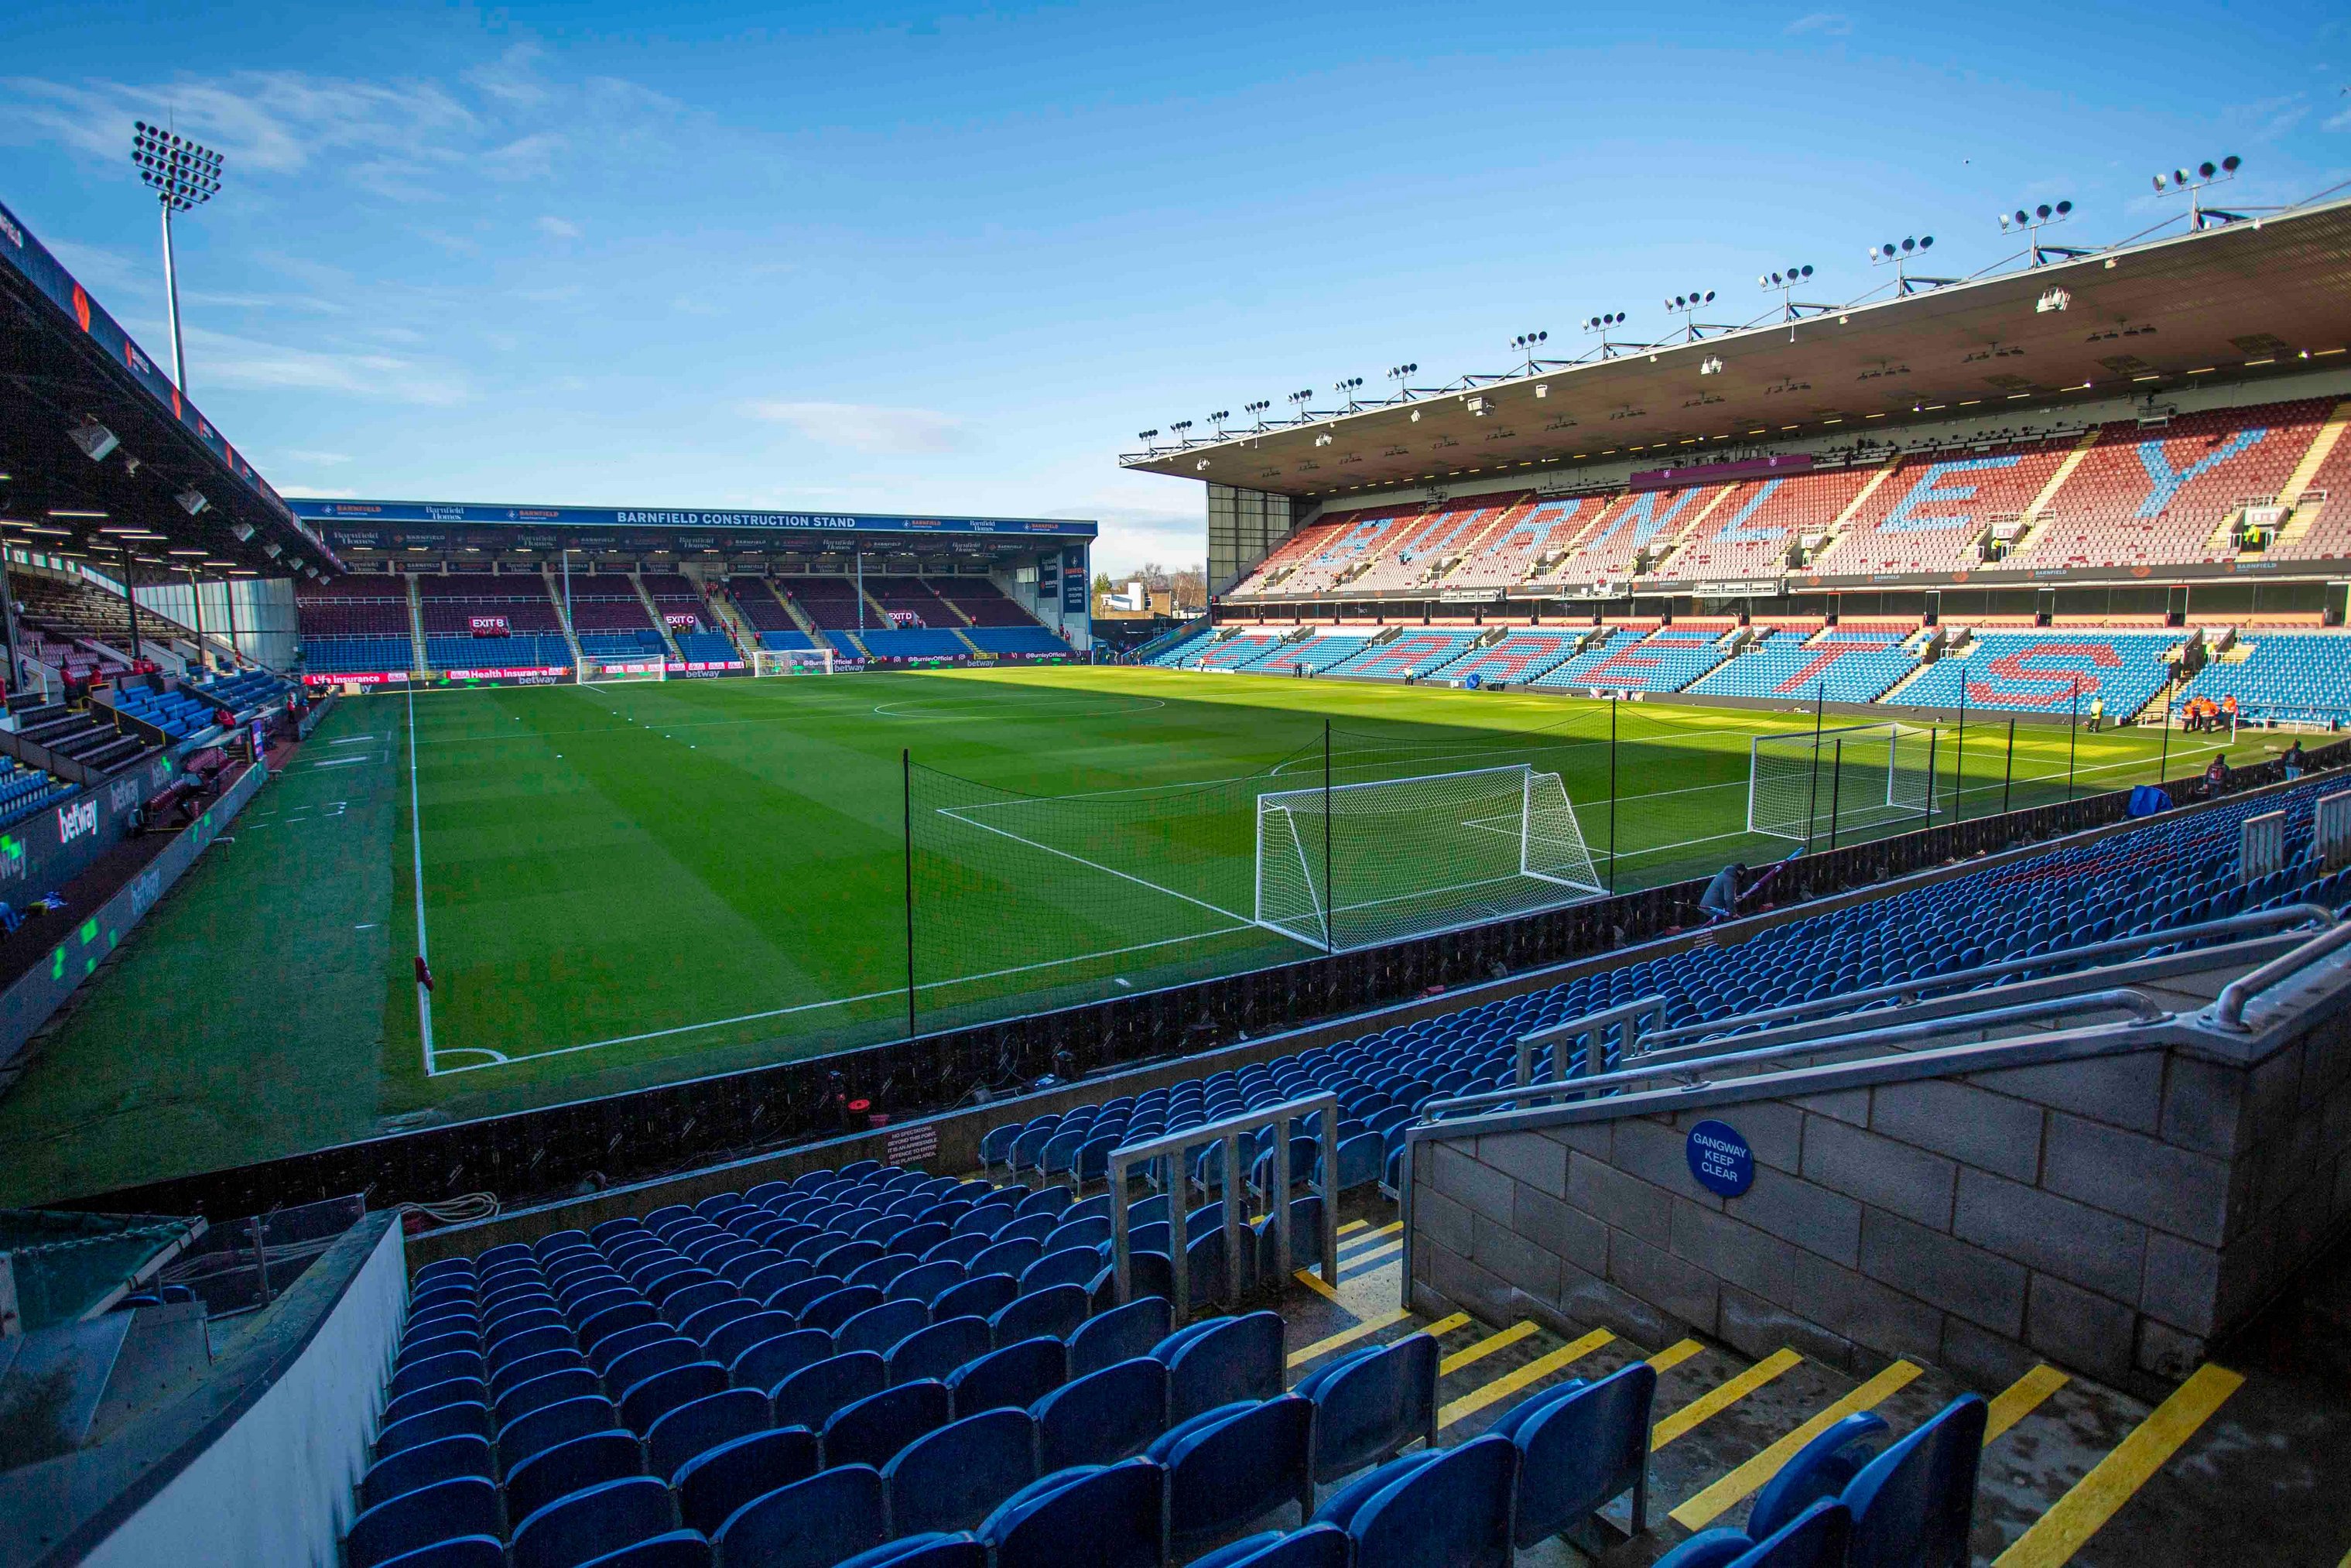 Without change, historic Turf Moor looks a decent blend of old and new